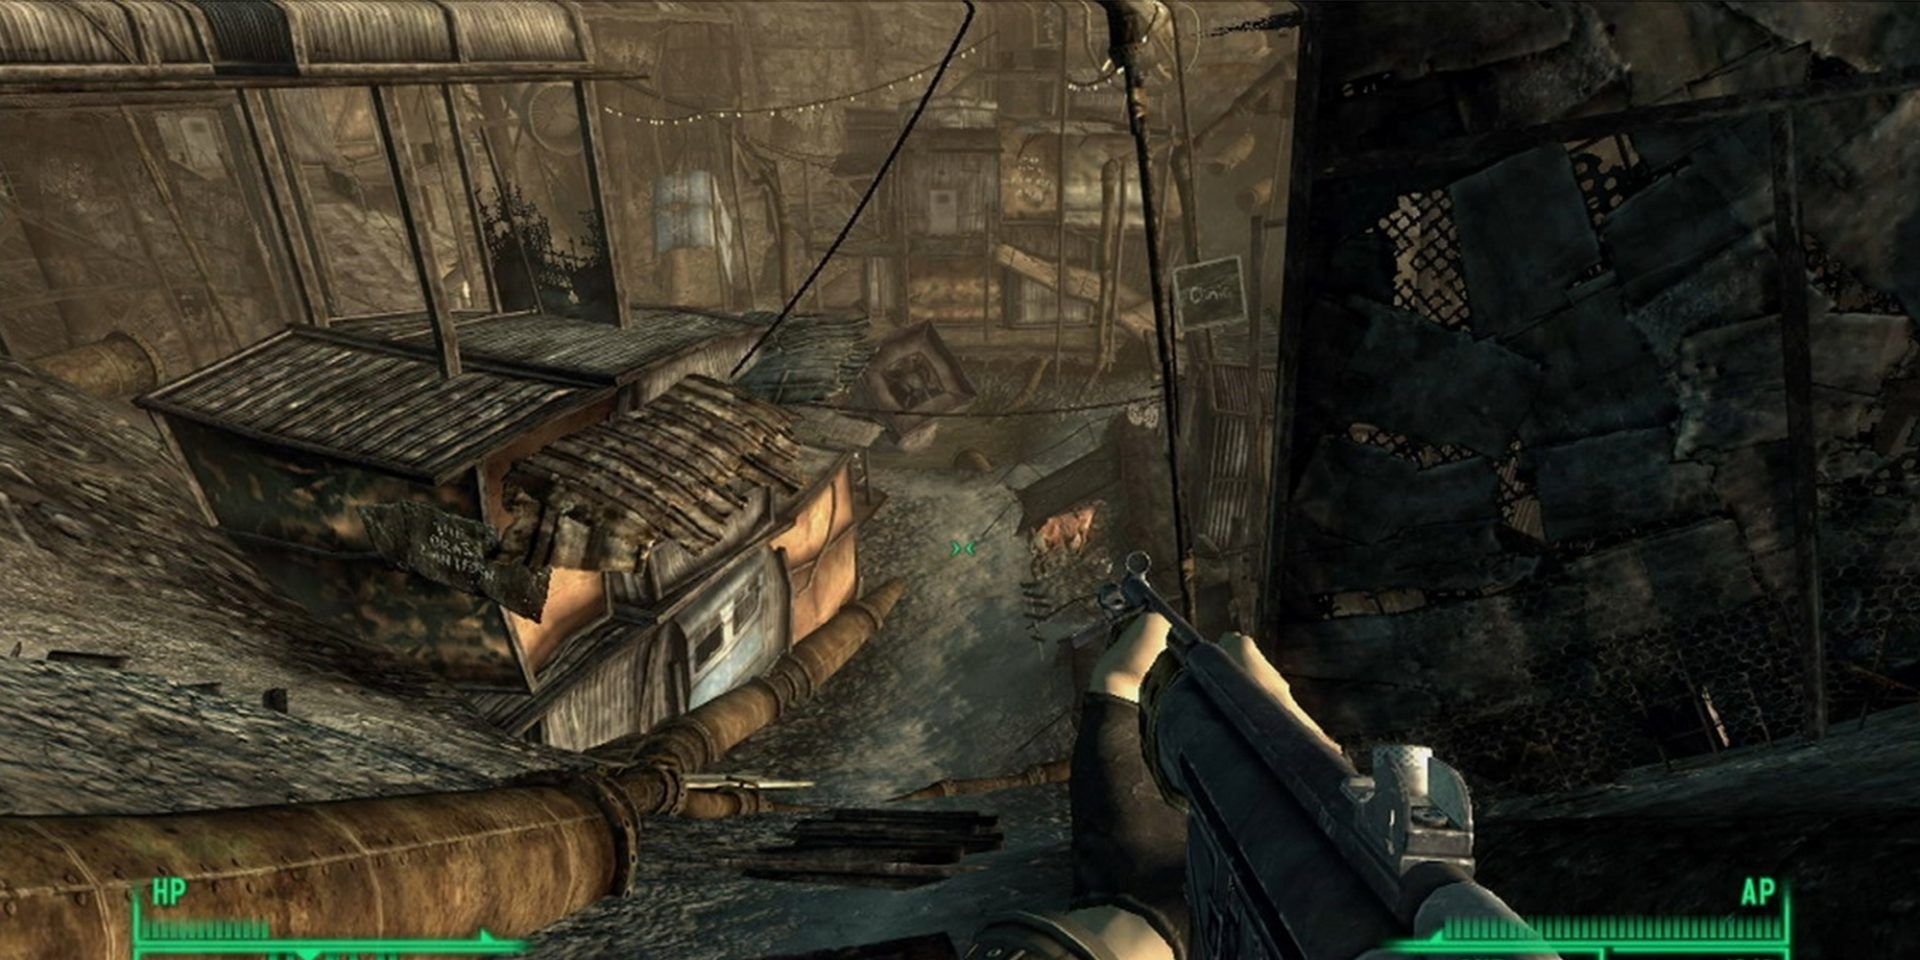 Fallout 3 Wasteland With Player Holding Gun